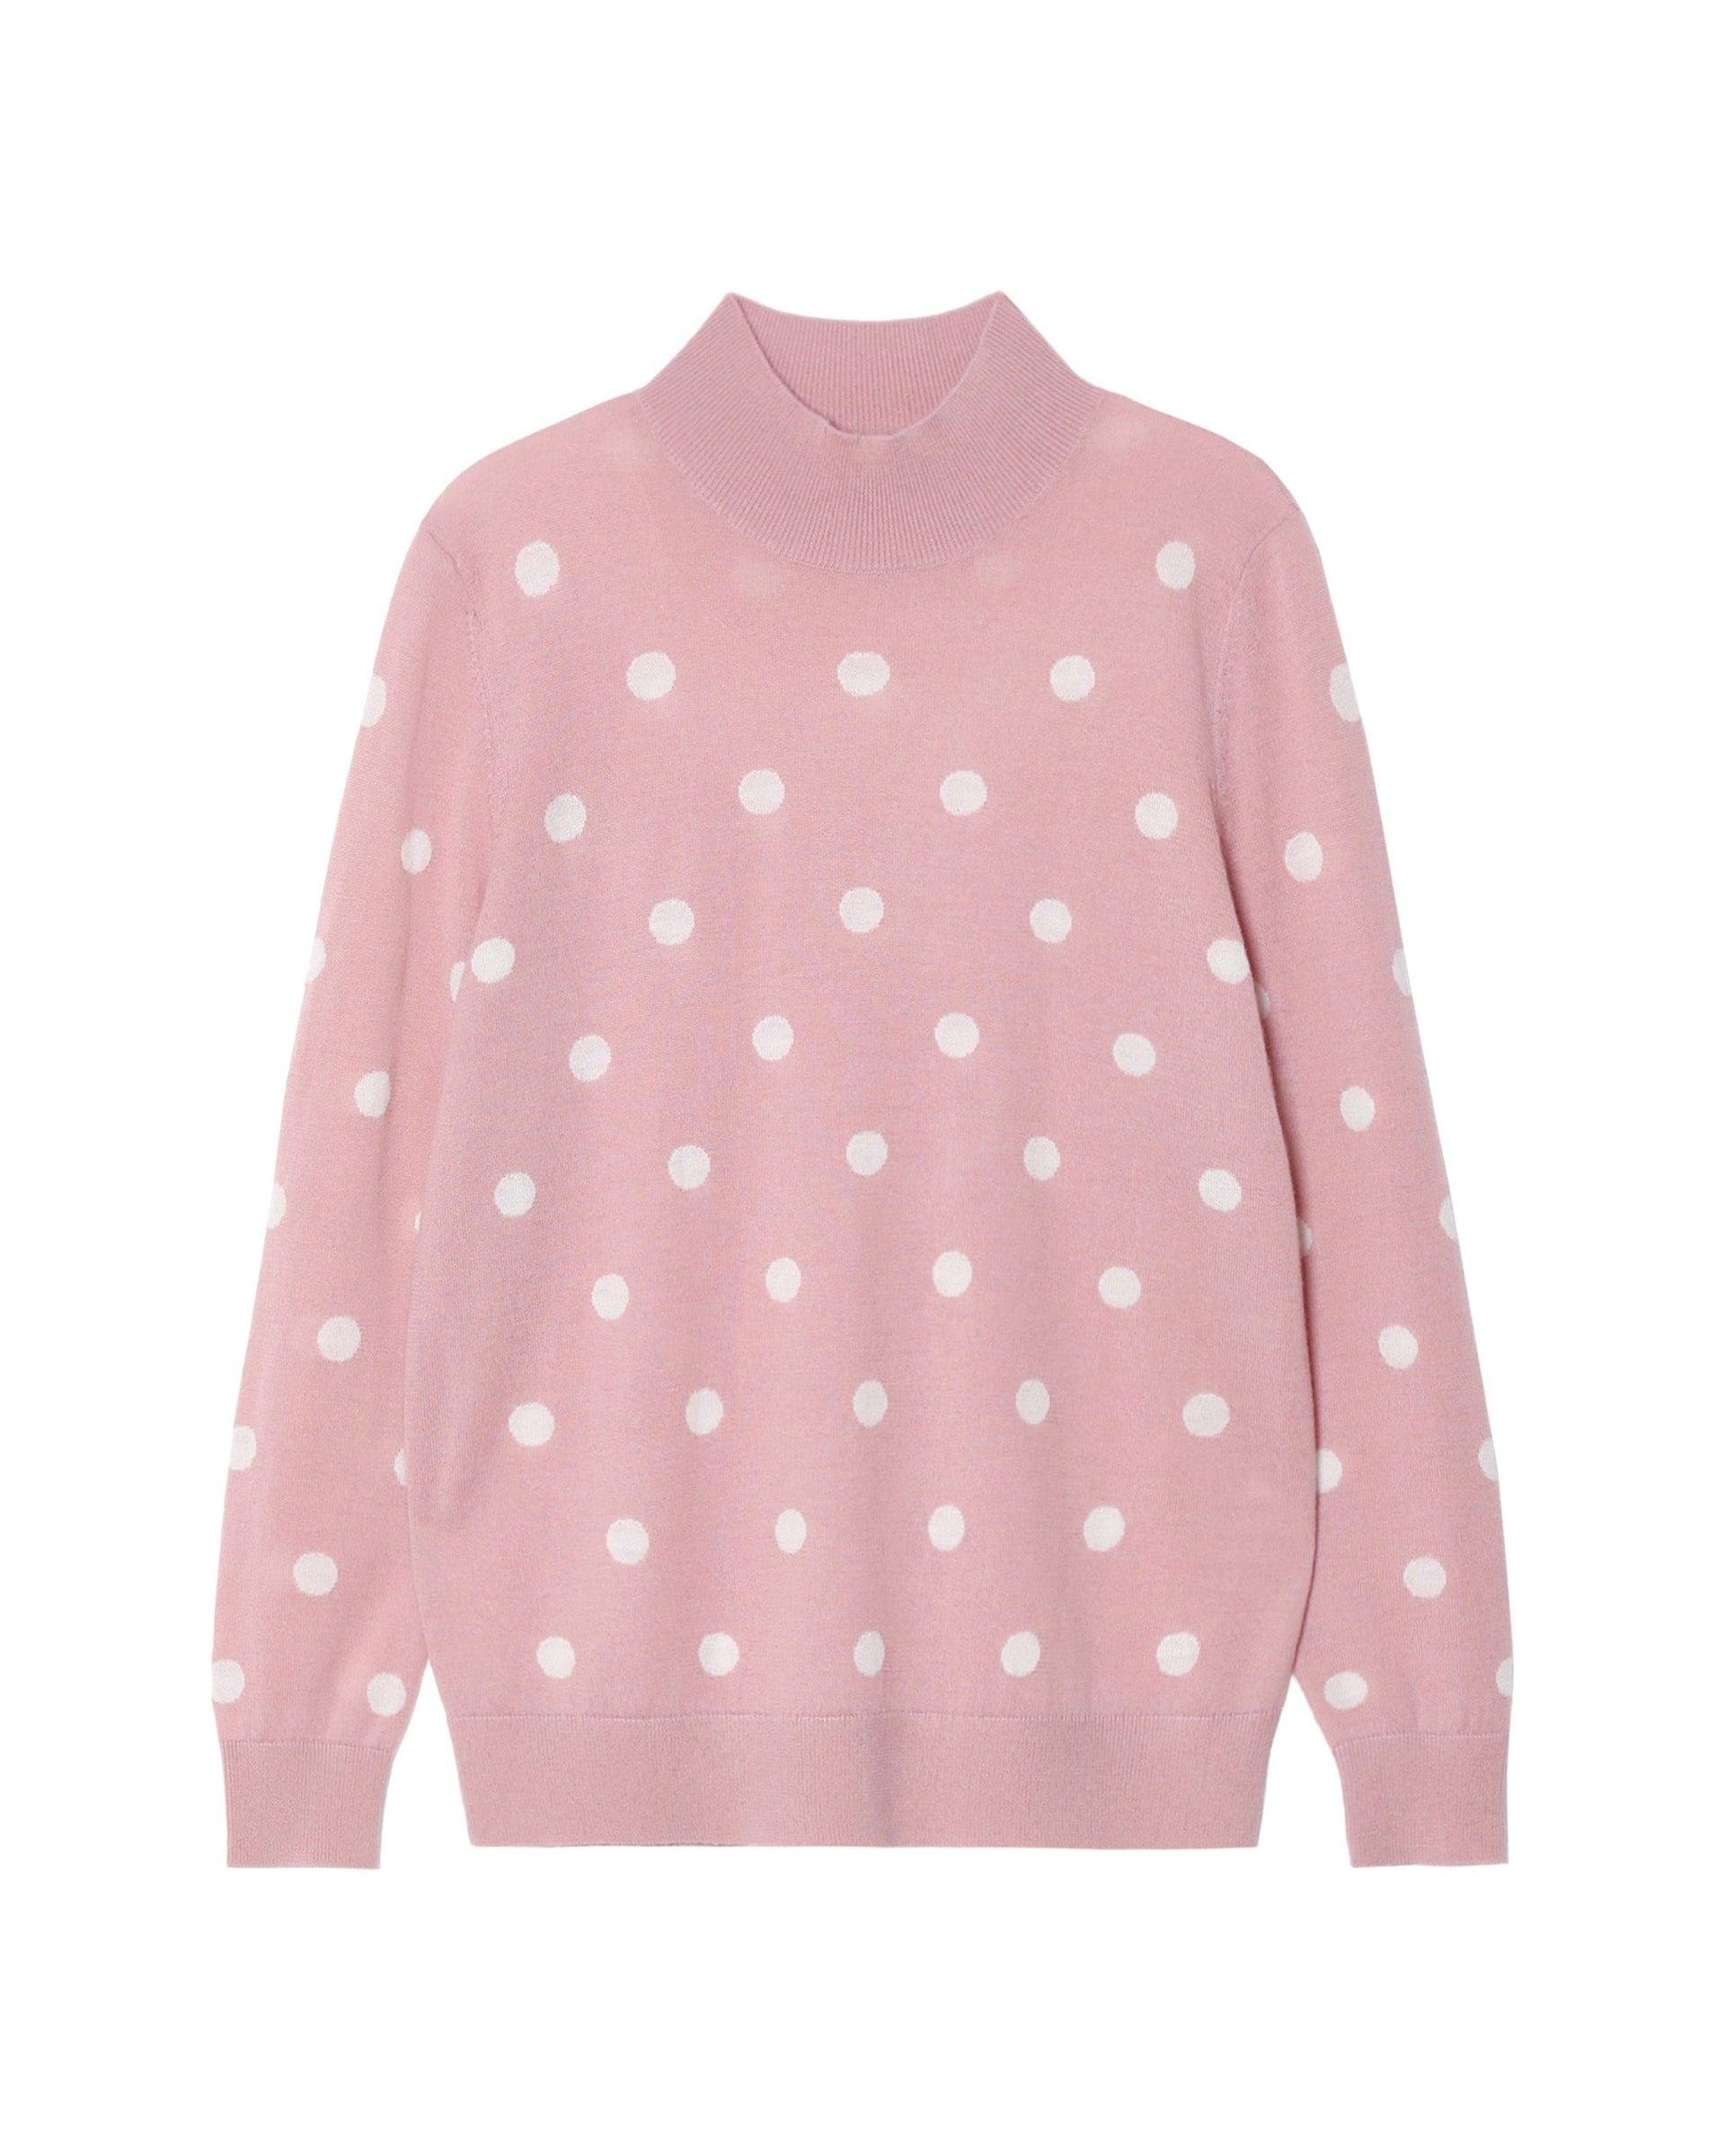 Cashmere Dot Long Sleeve Top by ANTEPRIMA